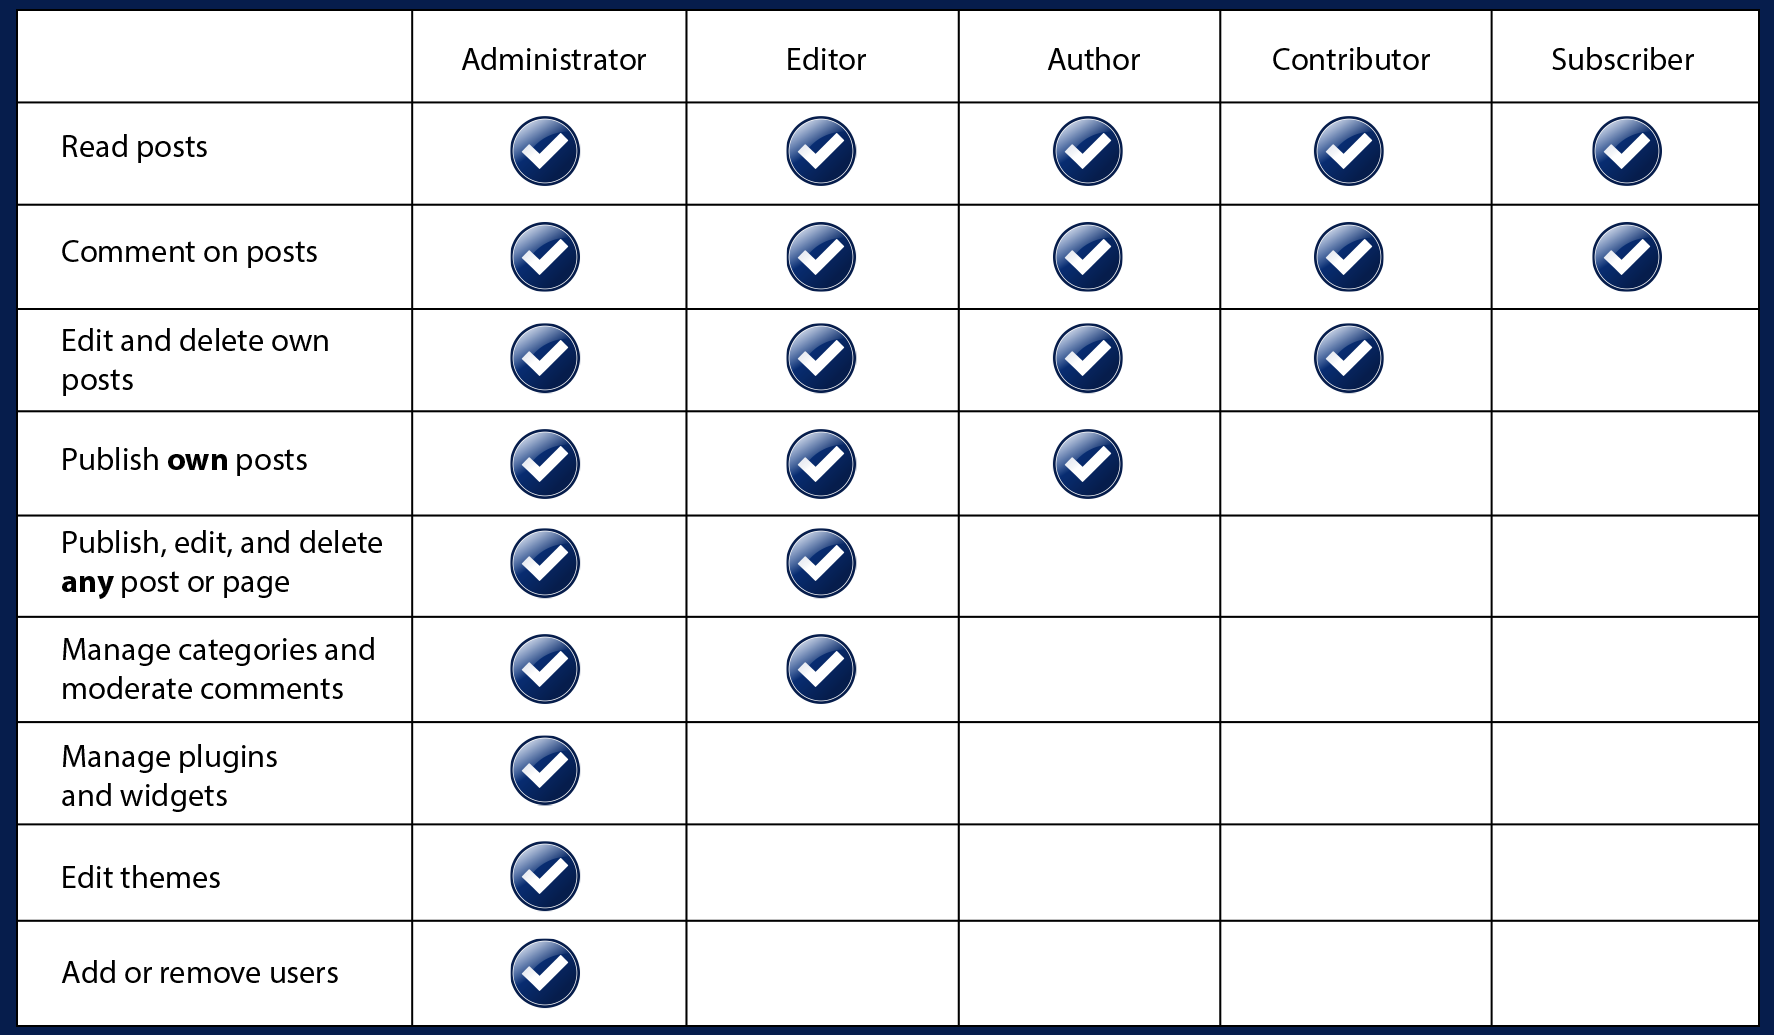 A table showing the permissions of each user role in WordPress